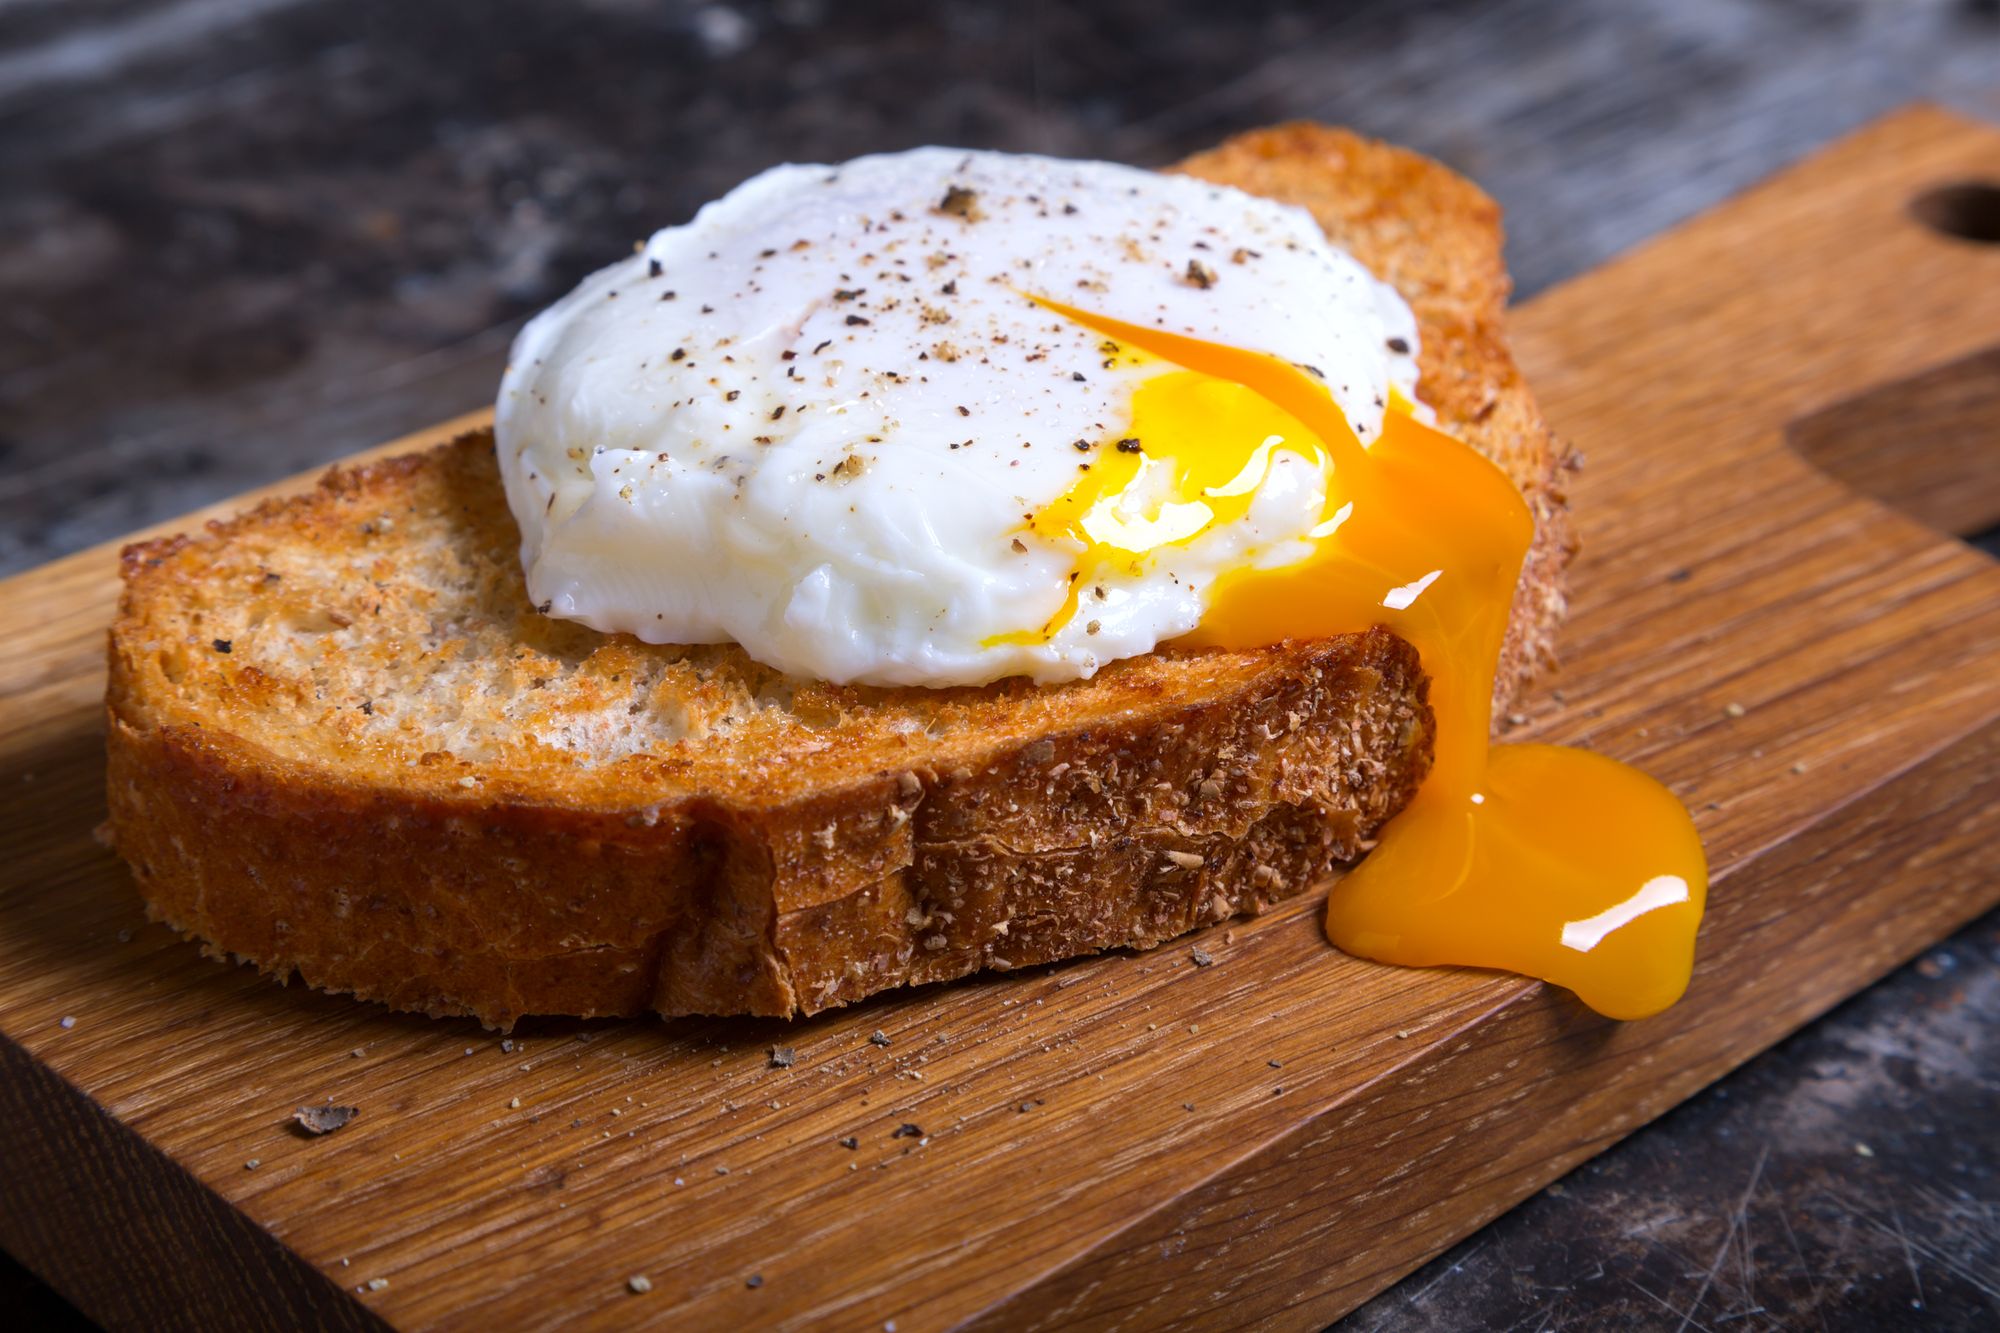 Poached egg on toast By Tetiana_Didenko | www.shutterstock.com